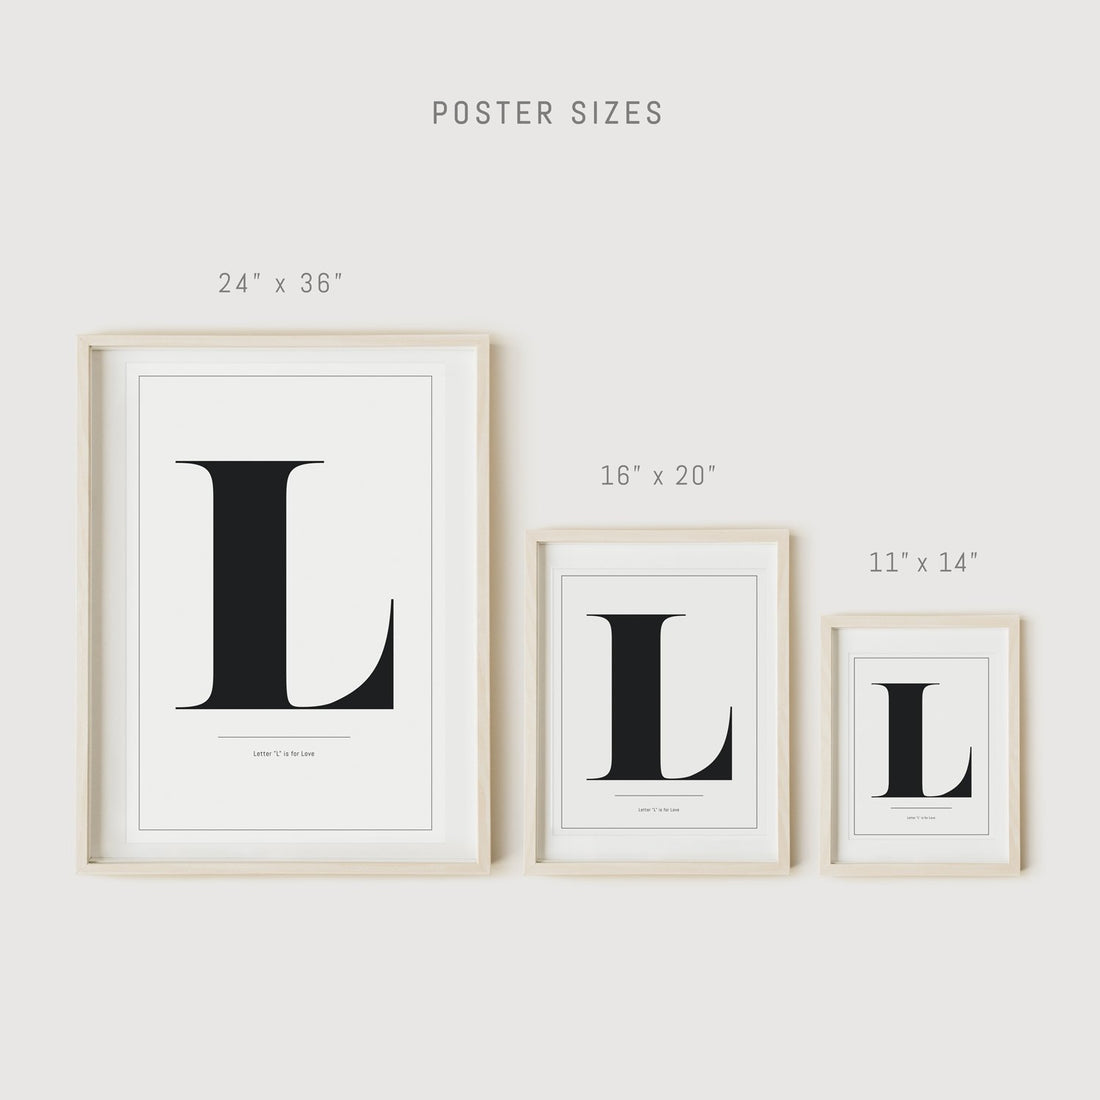 Poster sizes